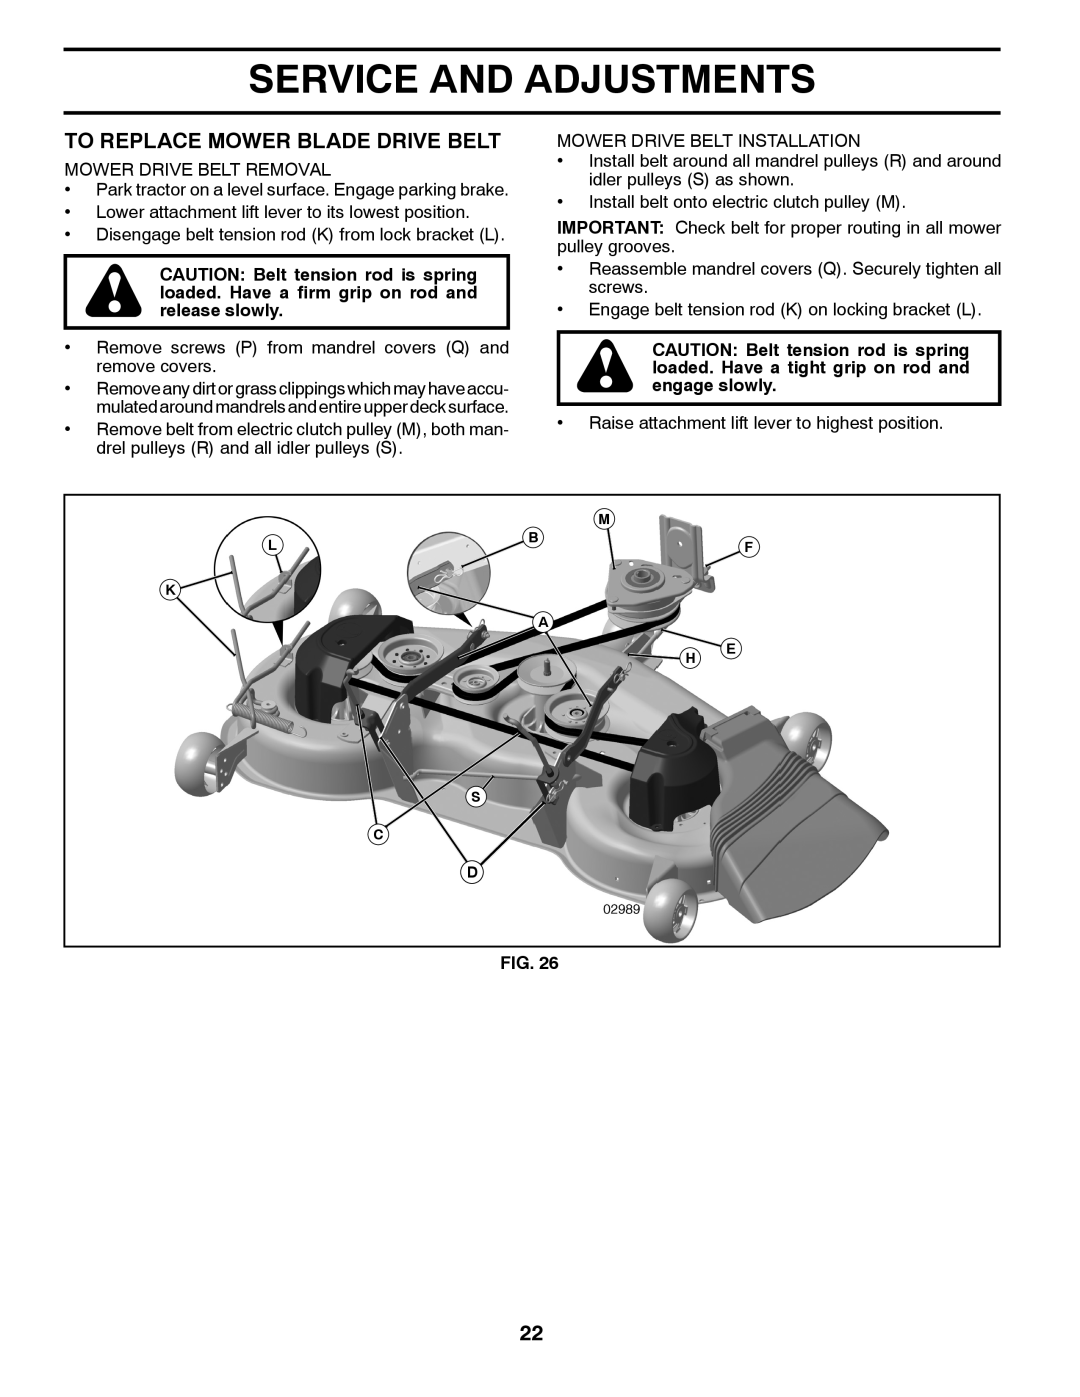 Univex 96043004400, 2348LS owner manual To Replace Mower Blade Drive Belt, Service And Adjustments 